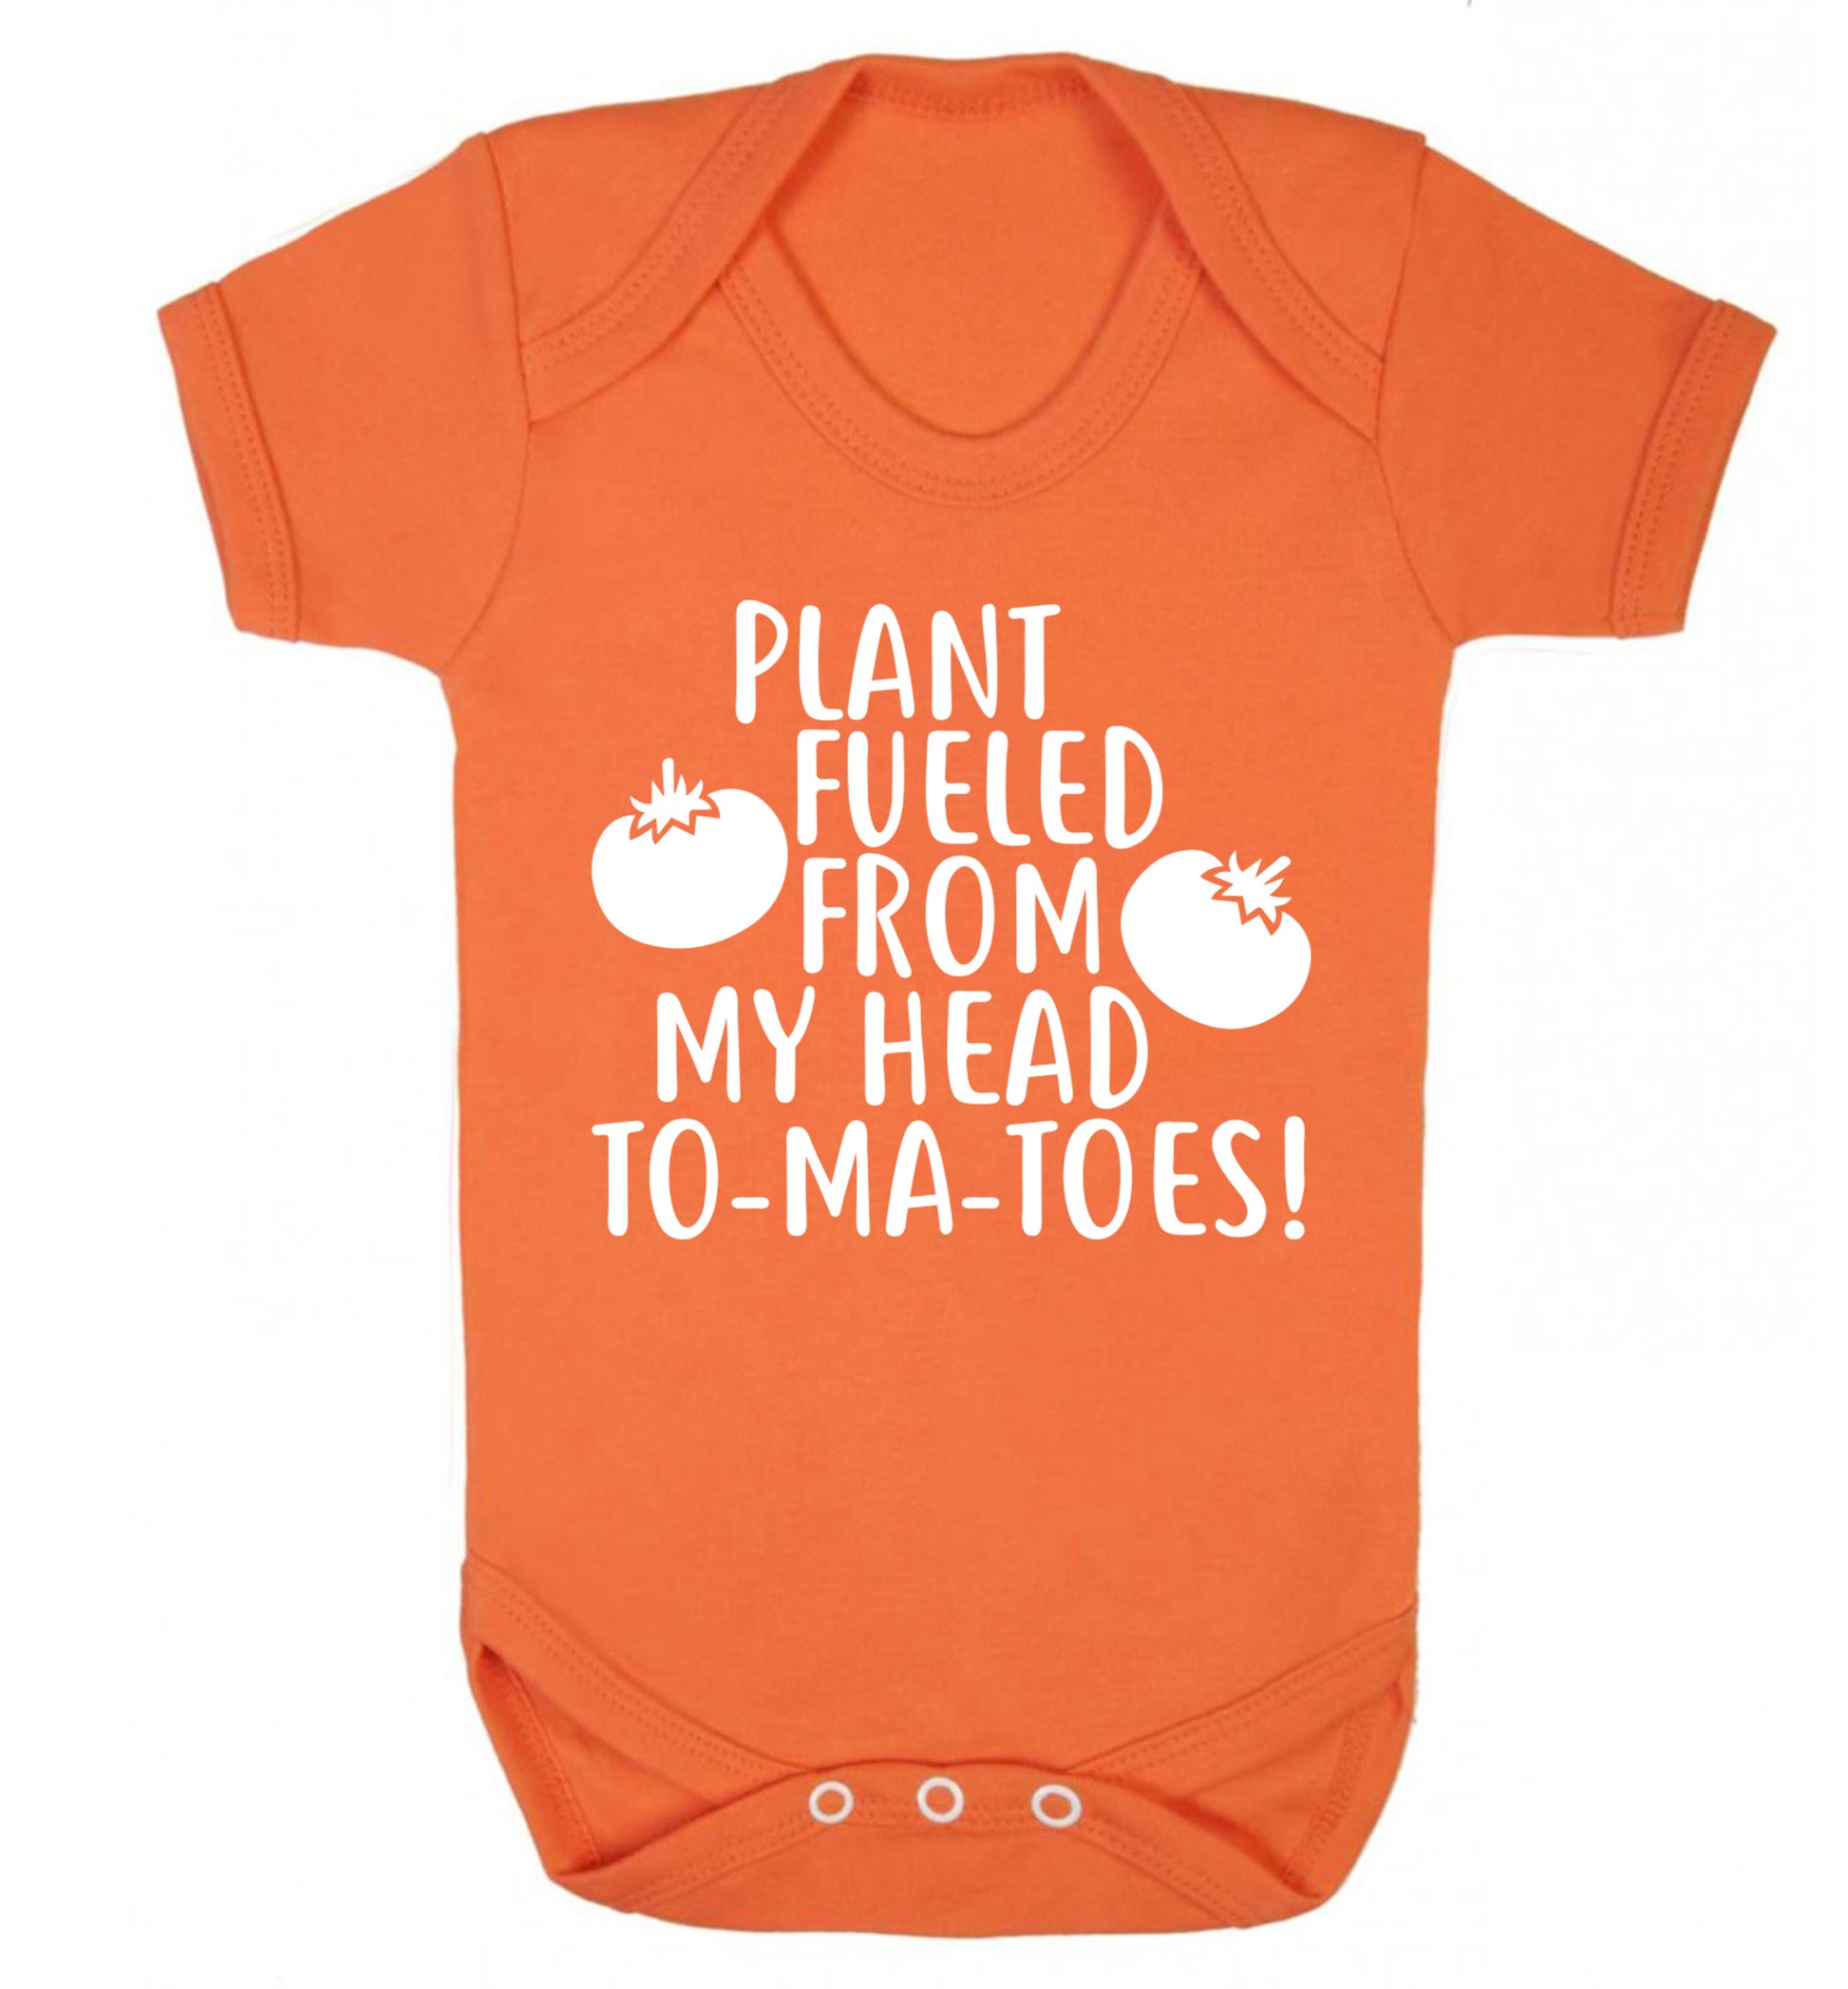 Plant fueled from my head to-ma-toes Baby Vest orange 18-24 months